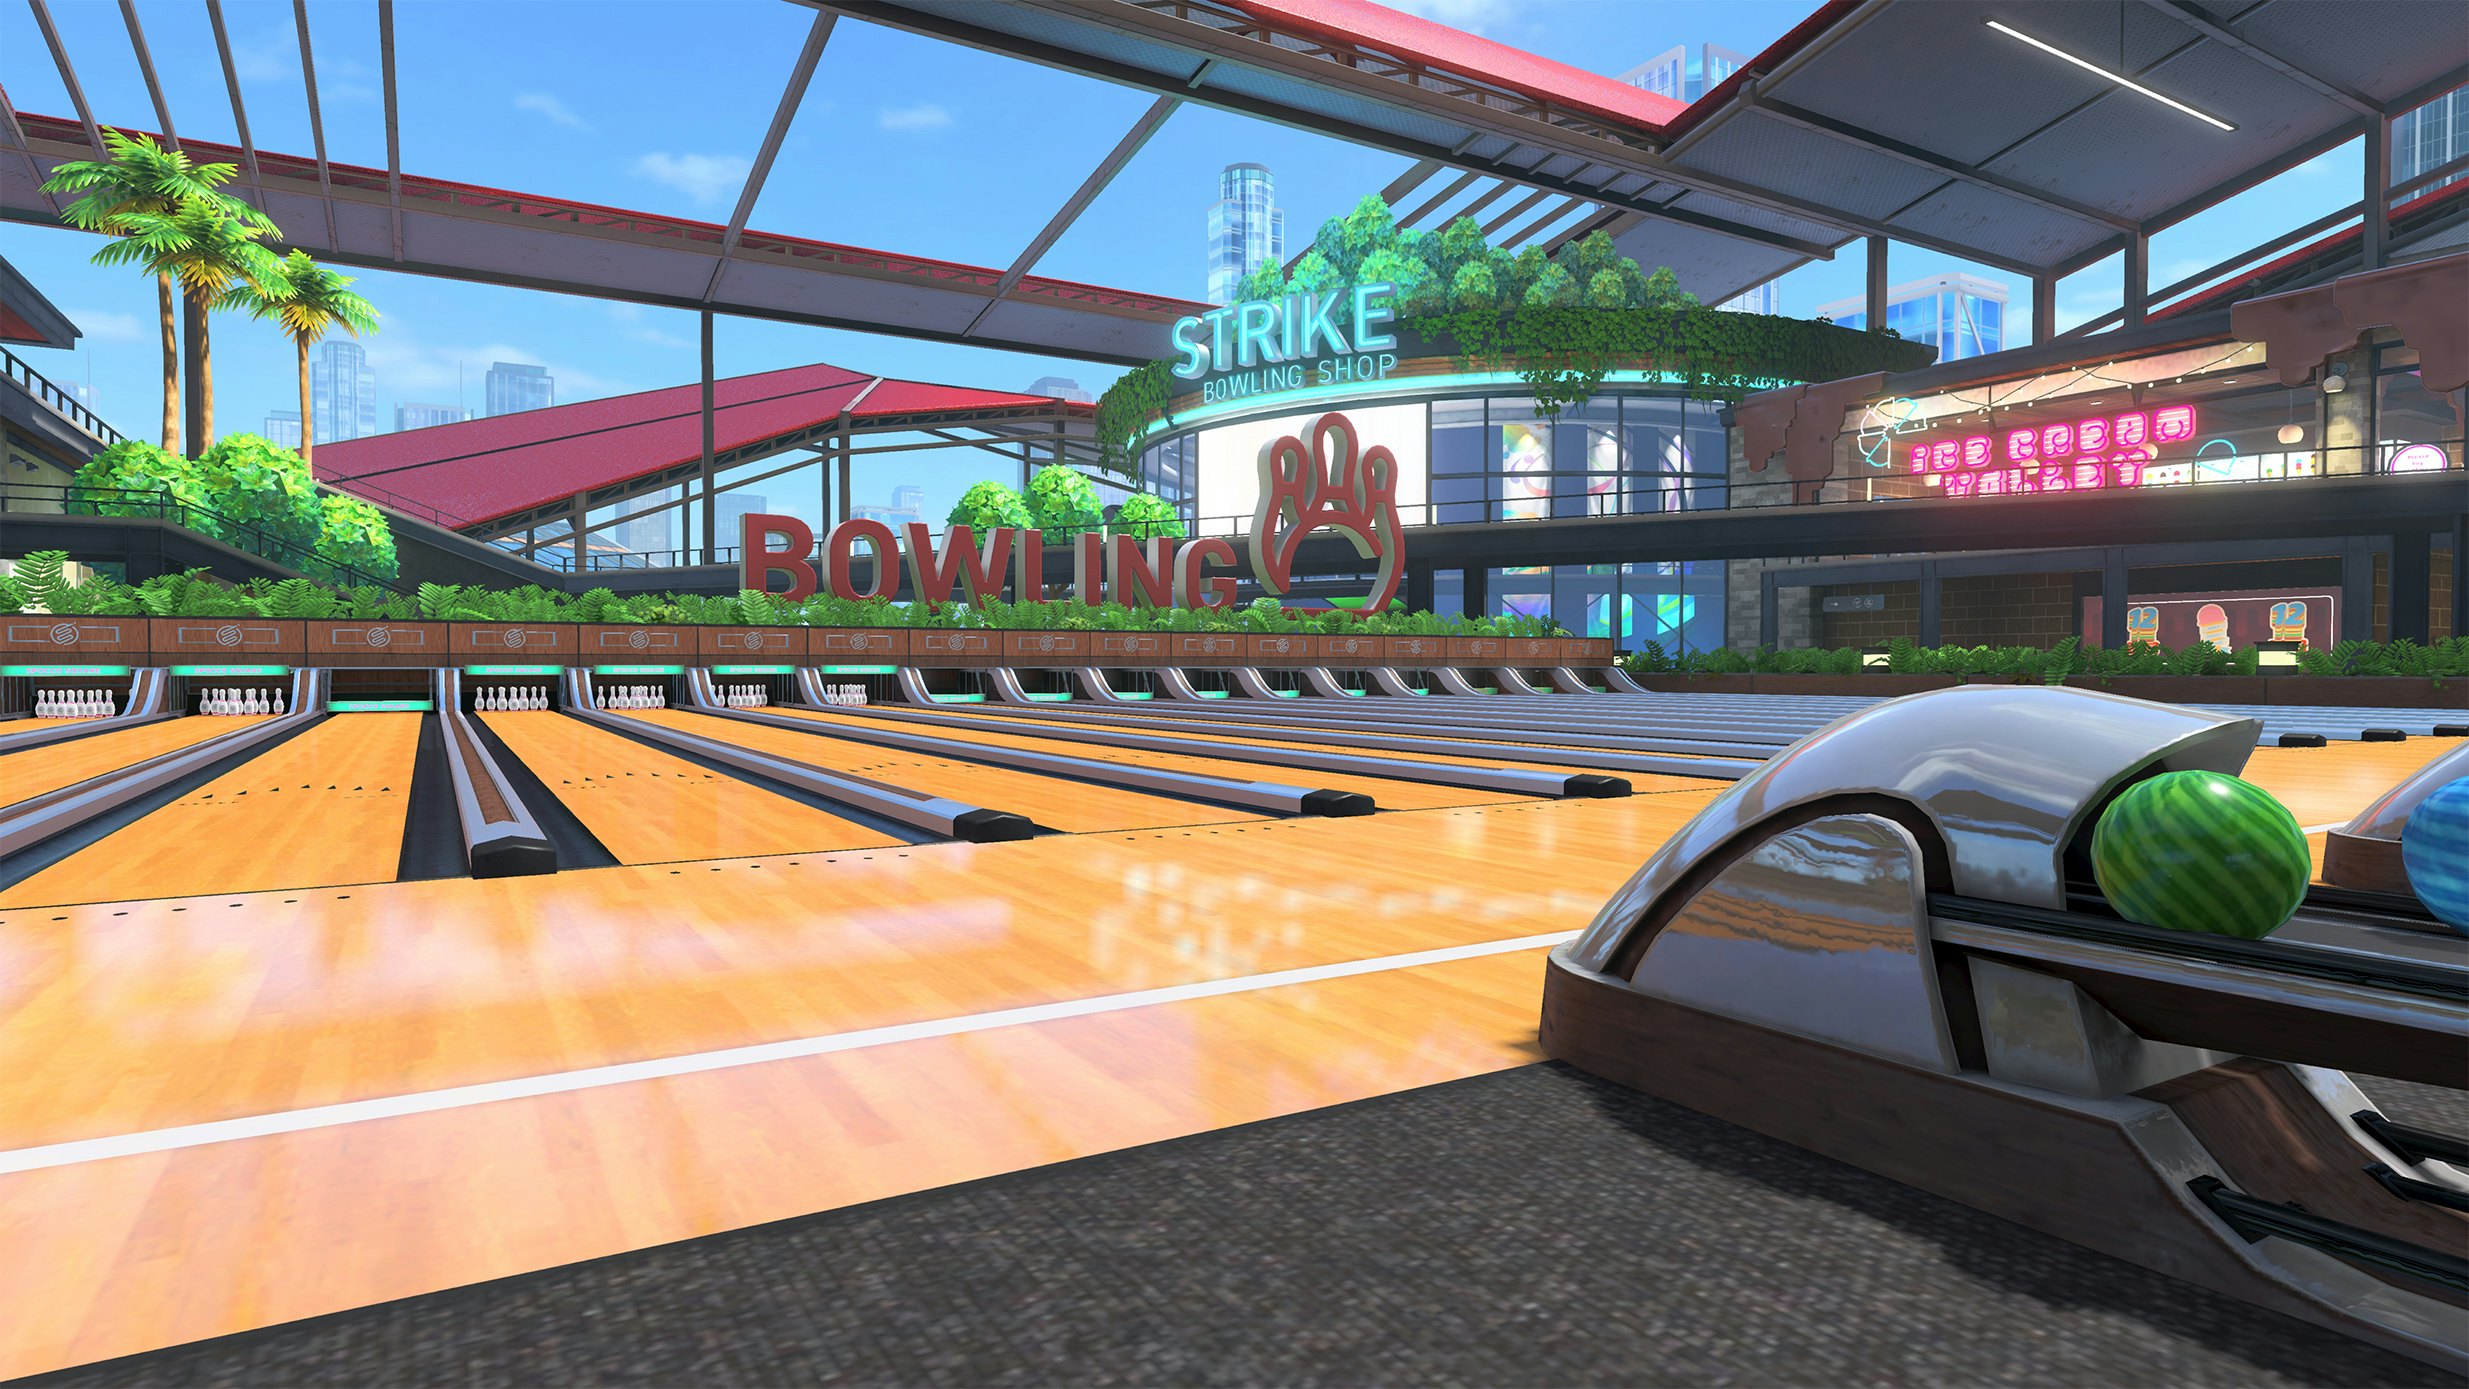 wii sports resort bowling giant ball